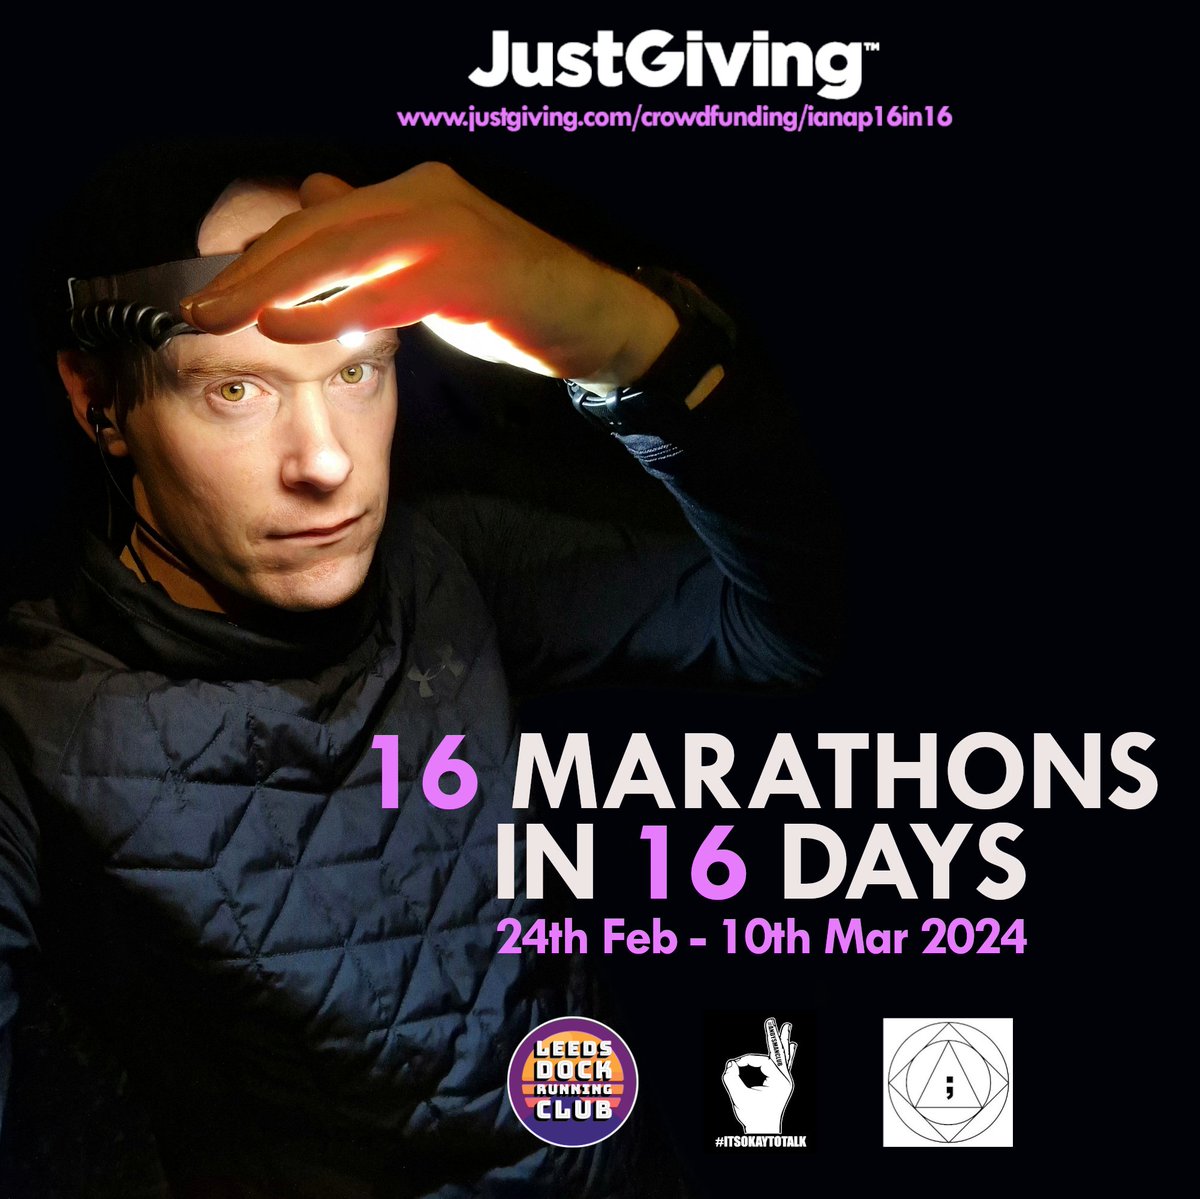 Our fantastic Run Leeds Ambassador Ian is running 16 marathons in 16 days to raise money for some great causes (see link). We wish you the best of luck in this massive challenge! 🍀 justgiving.com/crowdfunding/i… @recoveryrunner7 @andysmanclubuk